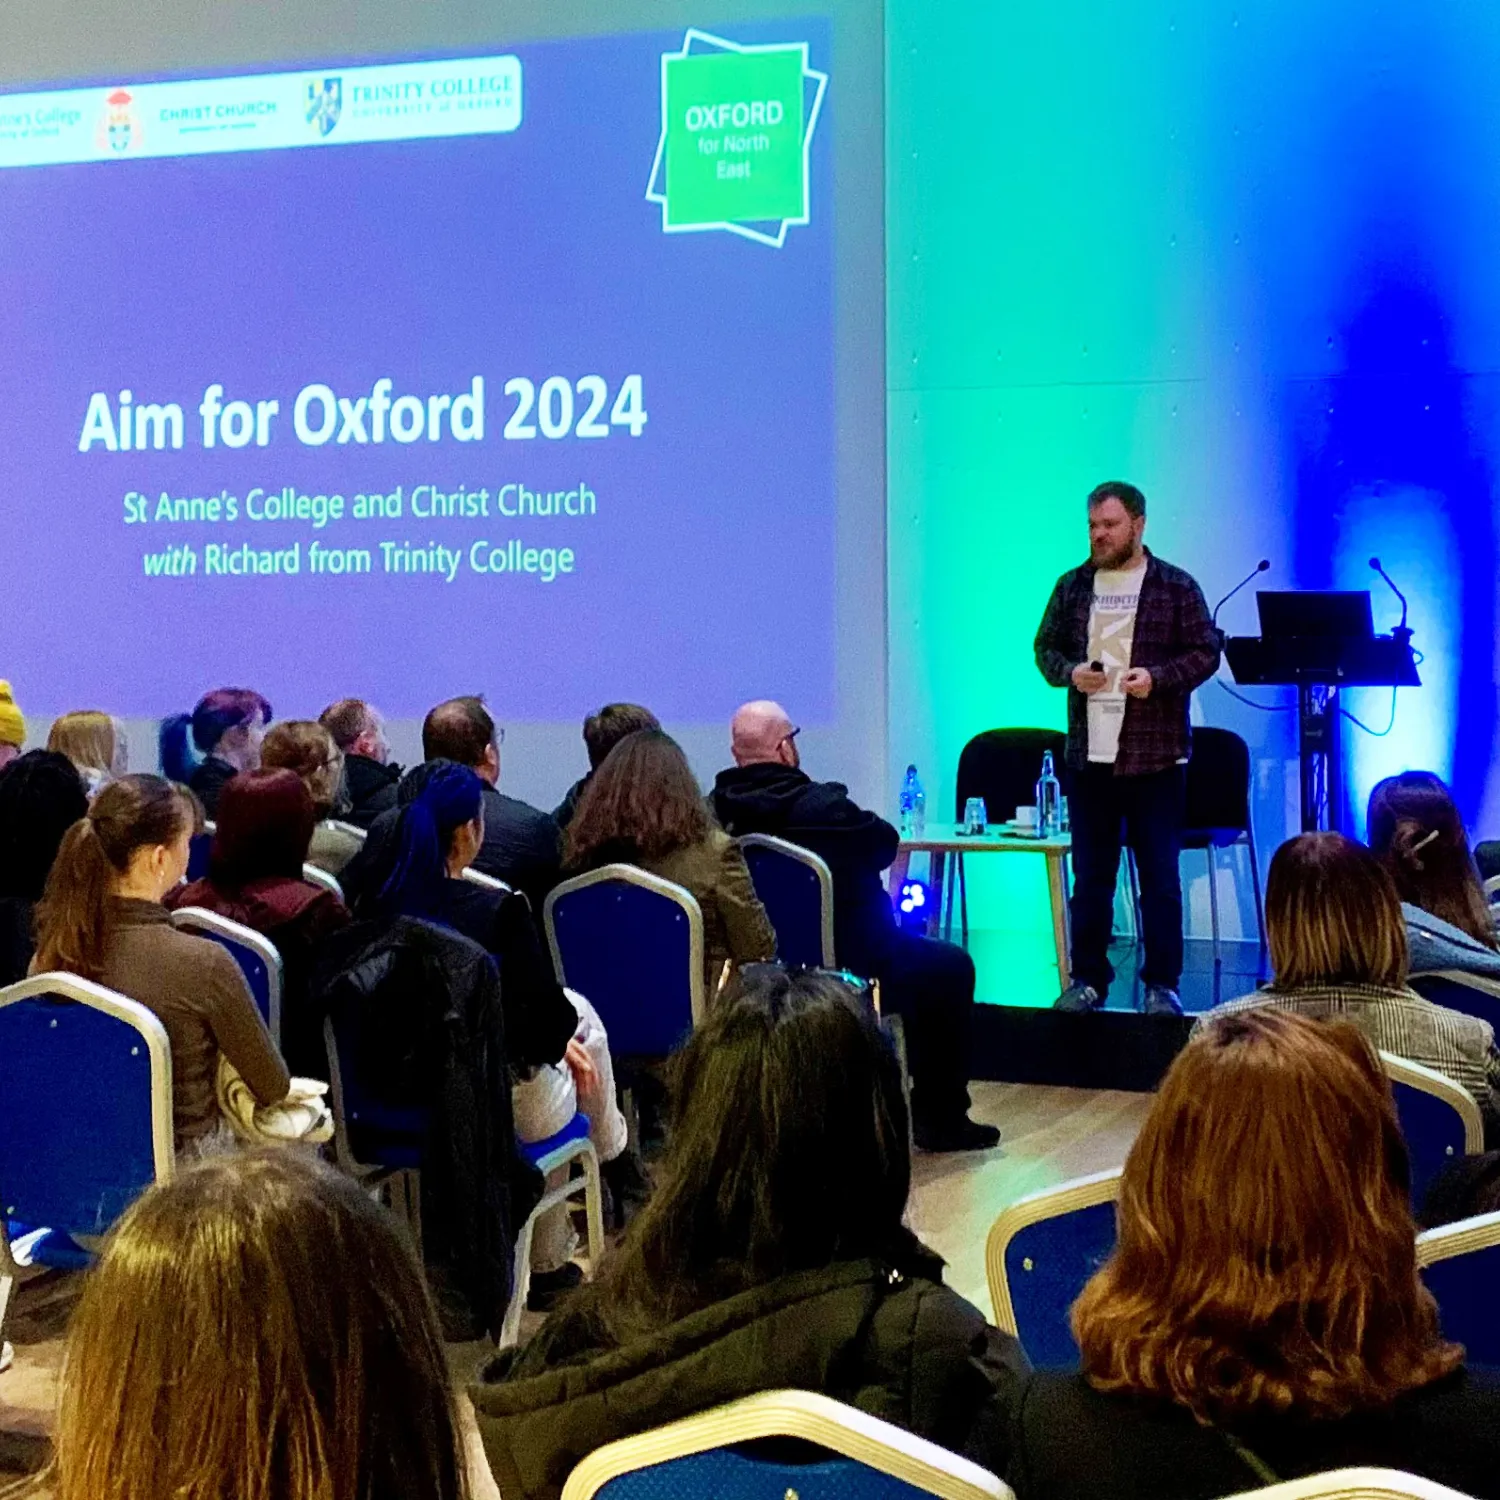 The Aim for Oxford launch event in Newcastle